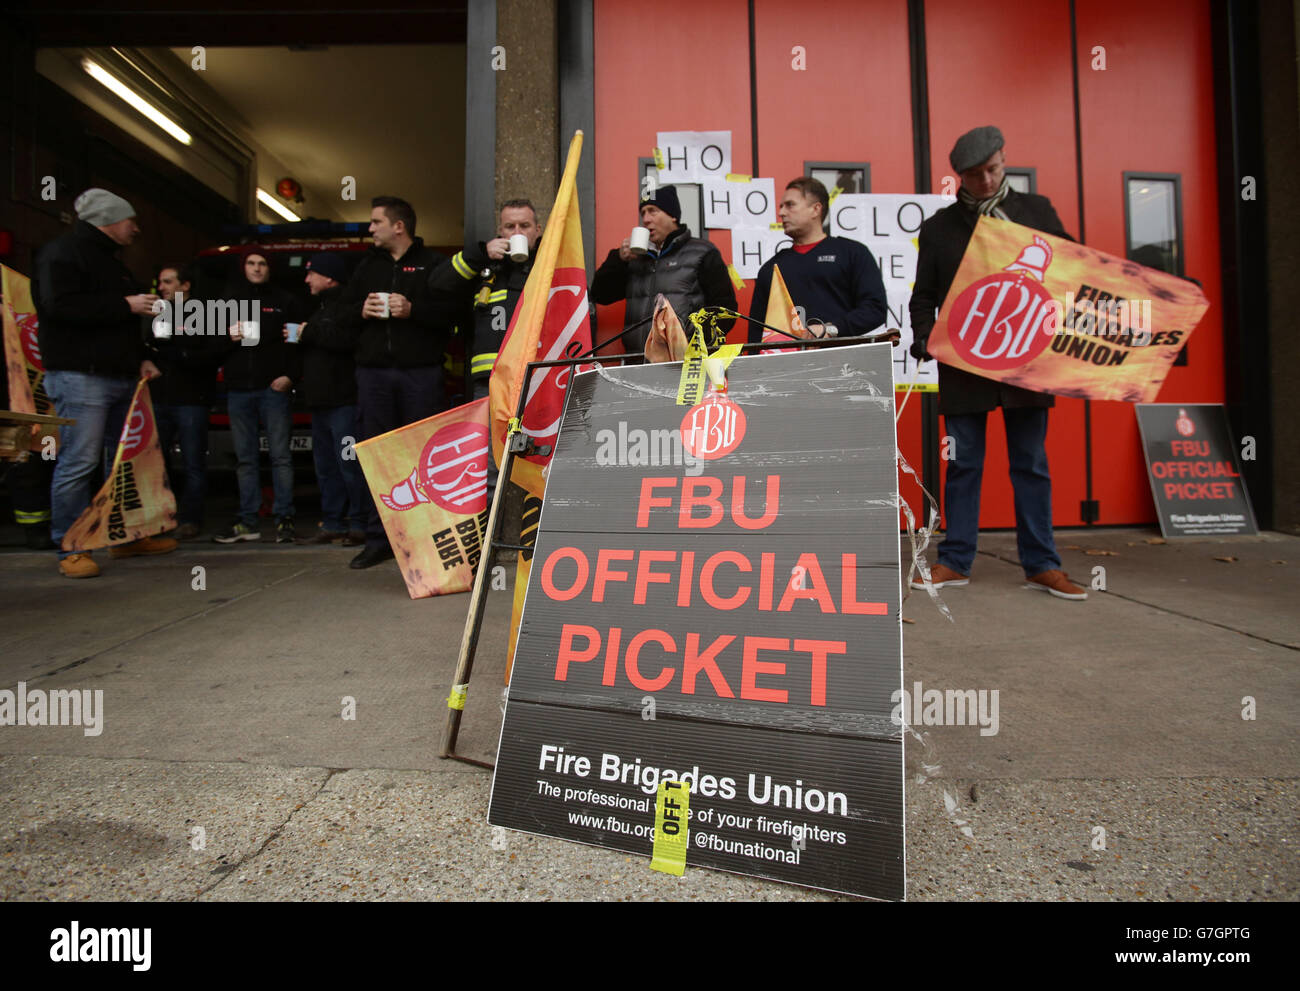 Firefighters from Bethnal Green Fire Station taking part in a one-day strike as part of a long-running row over pensions, in east London. Stock Photo